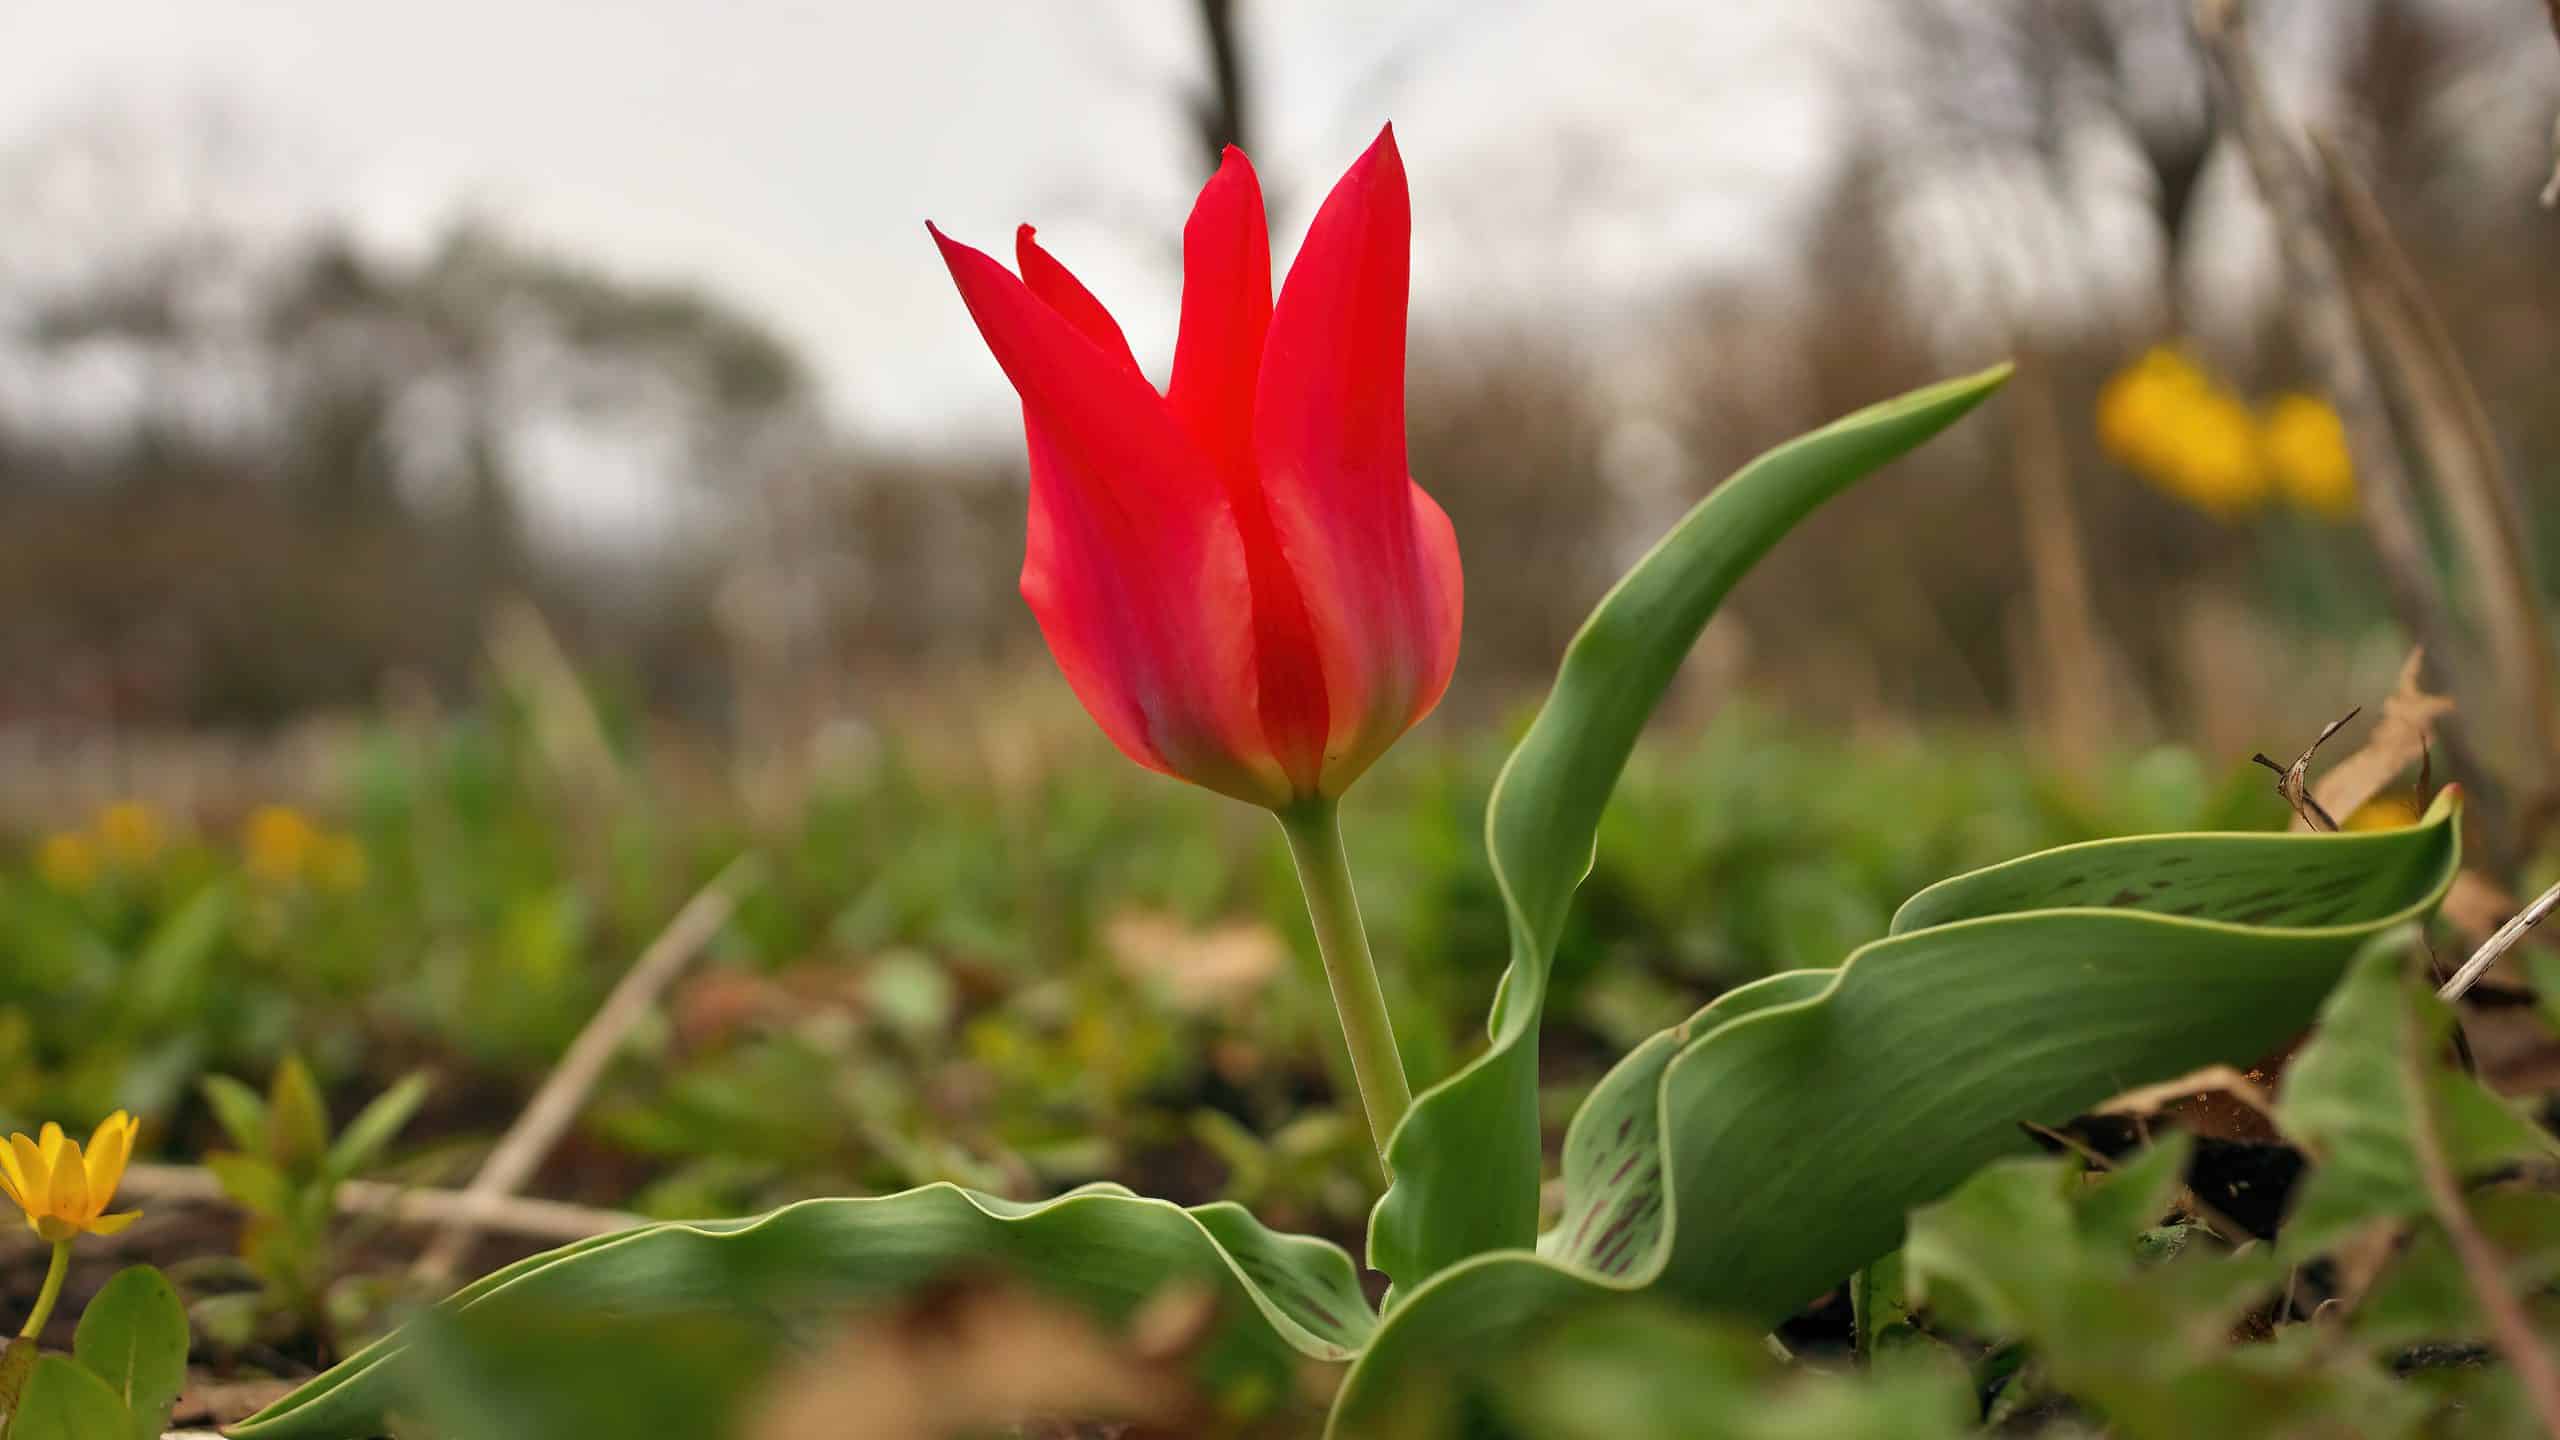 Red tulips, such as this Red Riding Hood tulip, are wonderful spring flowers.